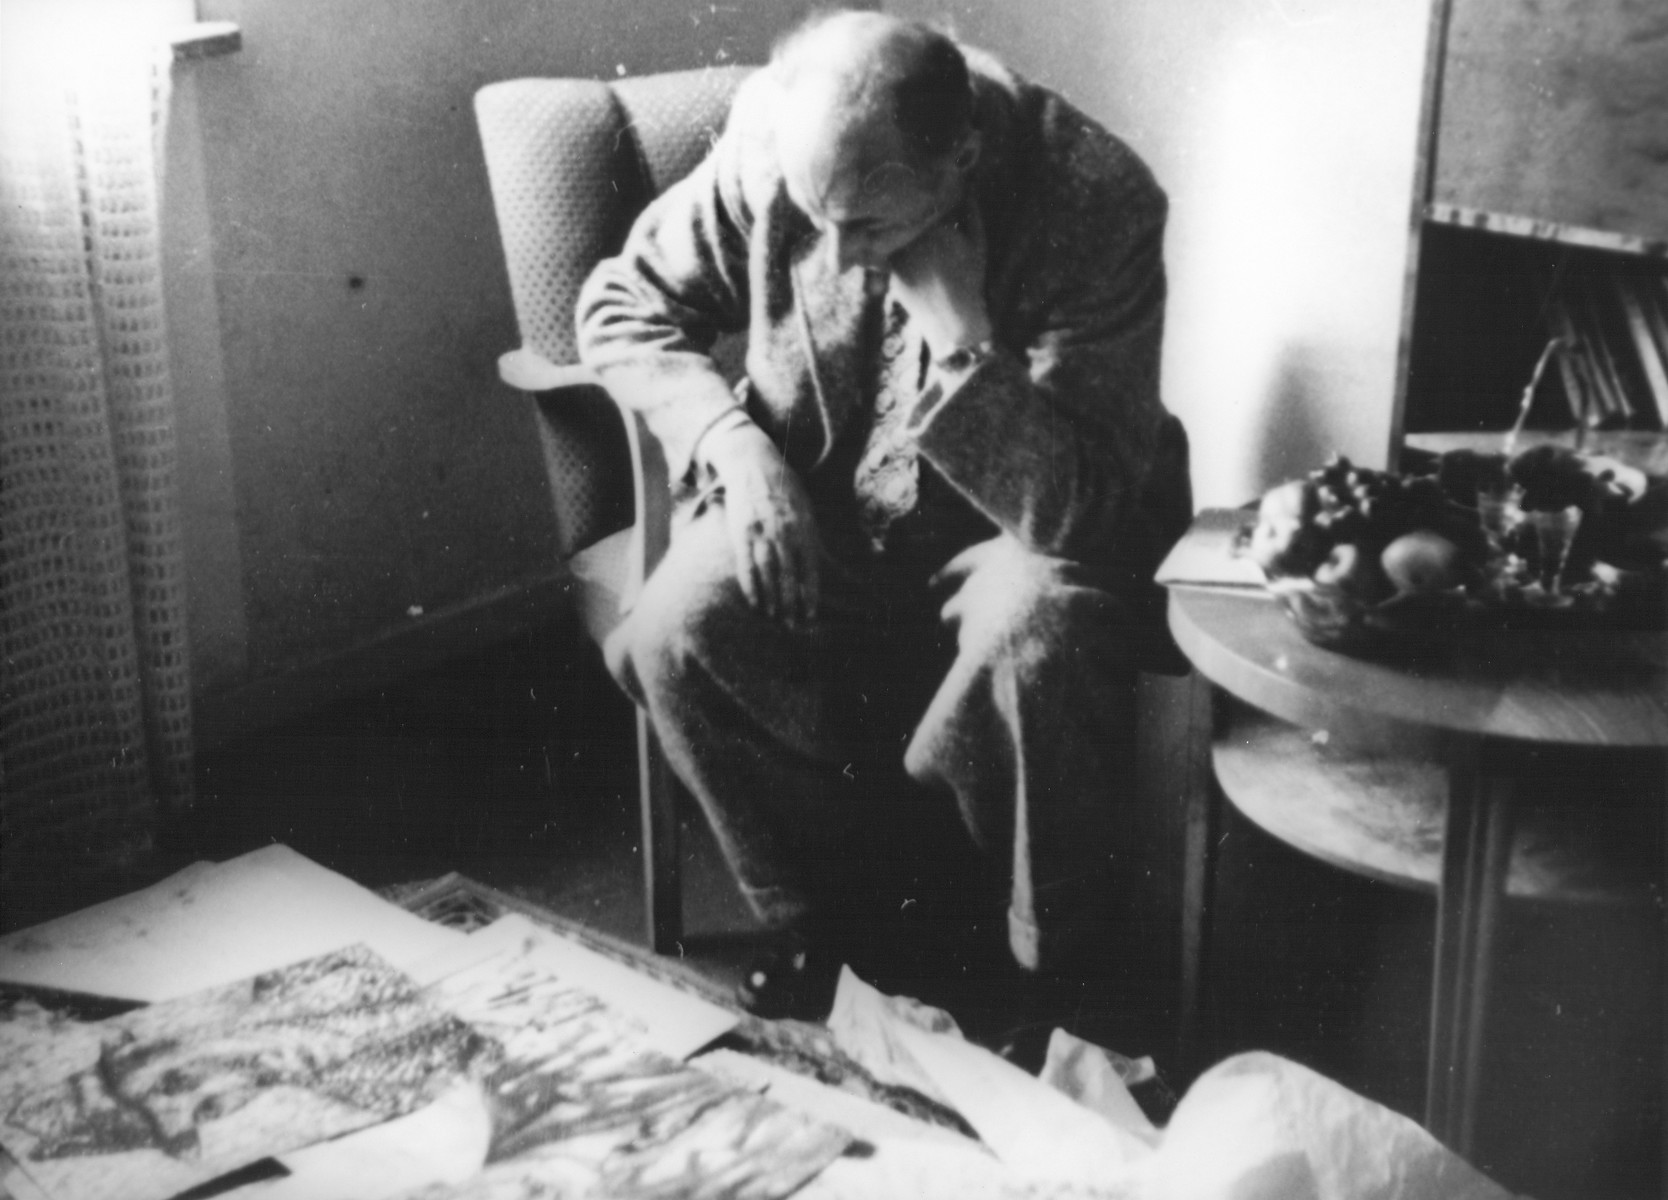 In the apartment of Nachman Zonabend, Lodz ghetto artist Josef Kowner looks at a collection of forty-five of his paintings that were rescued by Zonabend from the ghetto. 

Josef Kowner died in Sweden in 1968.